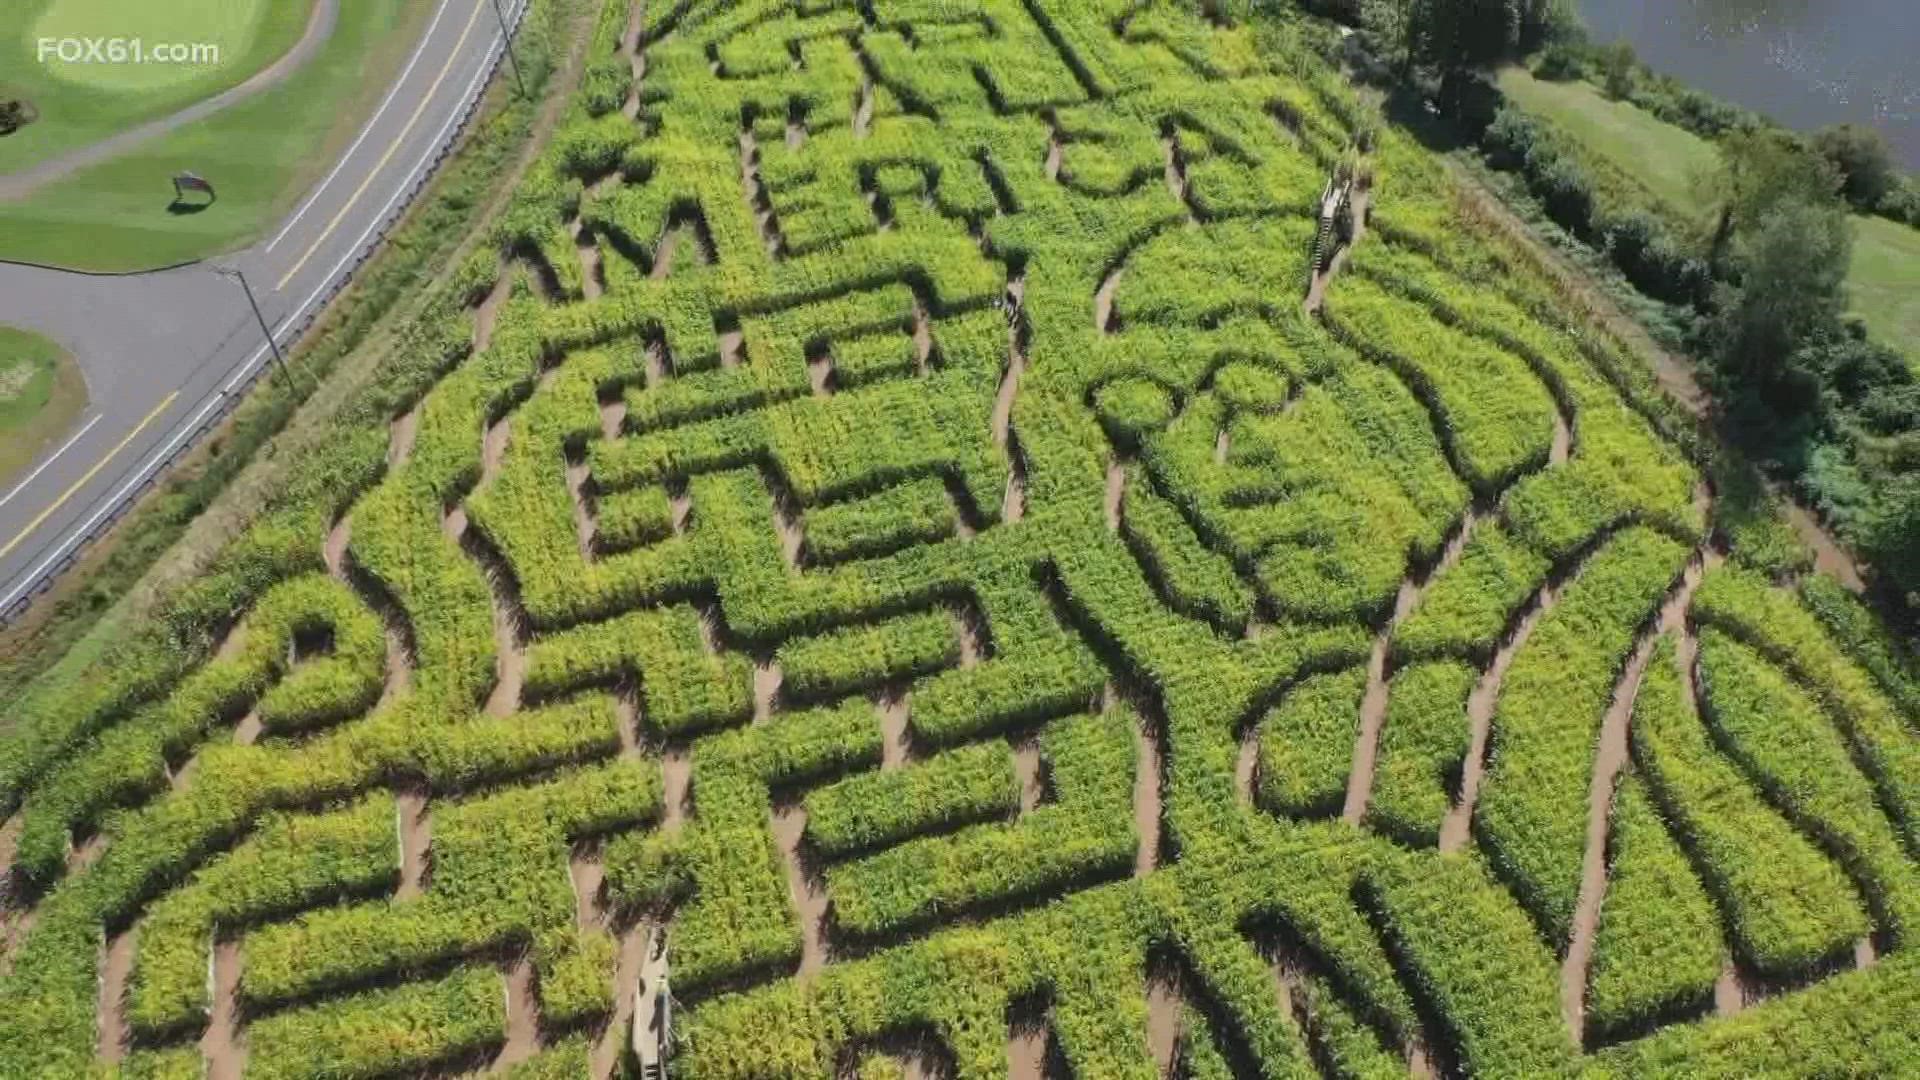 A Fall favorite, the Lyman Orchards Corn Maze is now in its 23rd year. Each year the team at Lyman Orchards tries to outdo the year before.